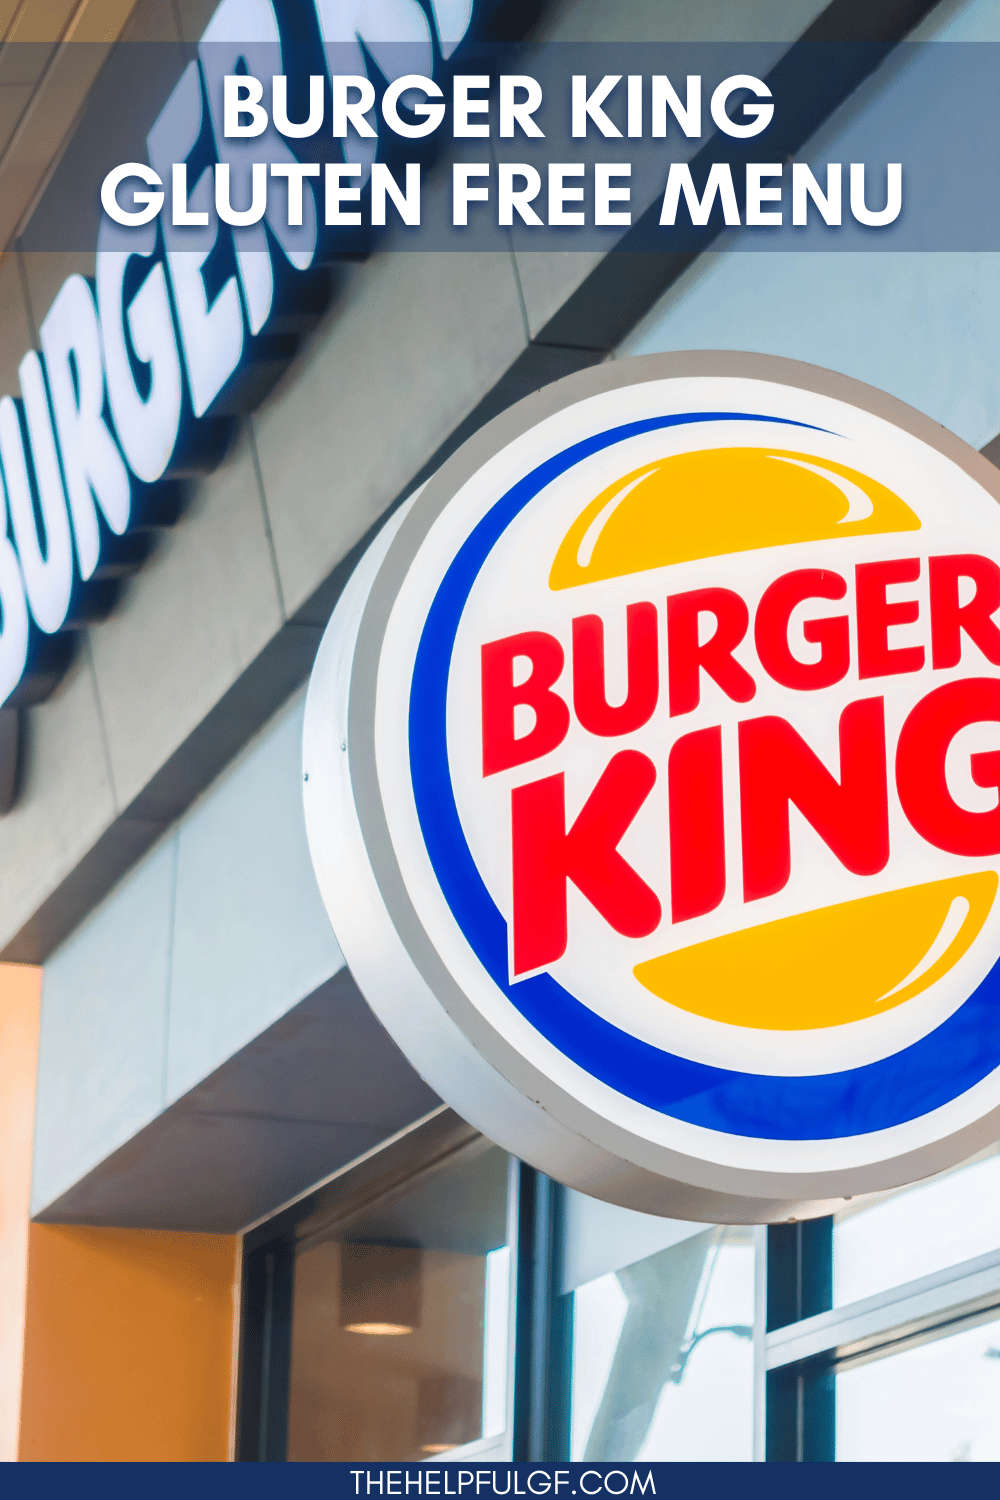 Photo of a sign with the Burger King logo and a text overlay that says Burger King Gluten Free Menu